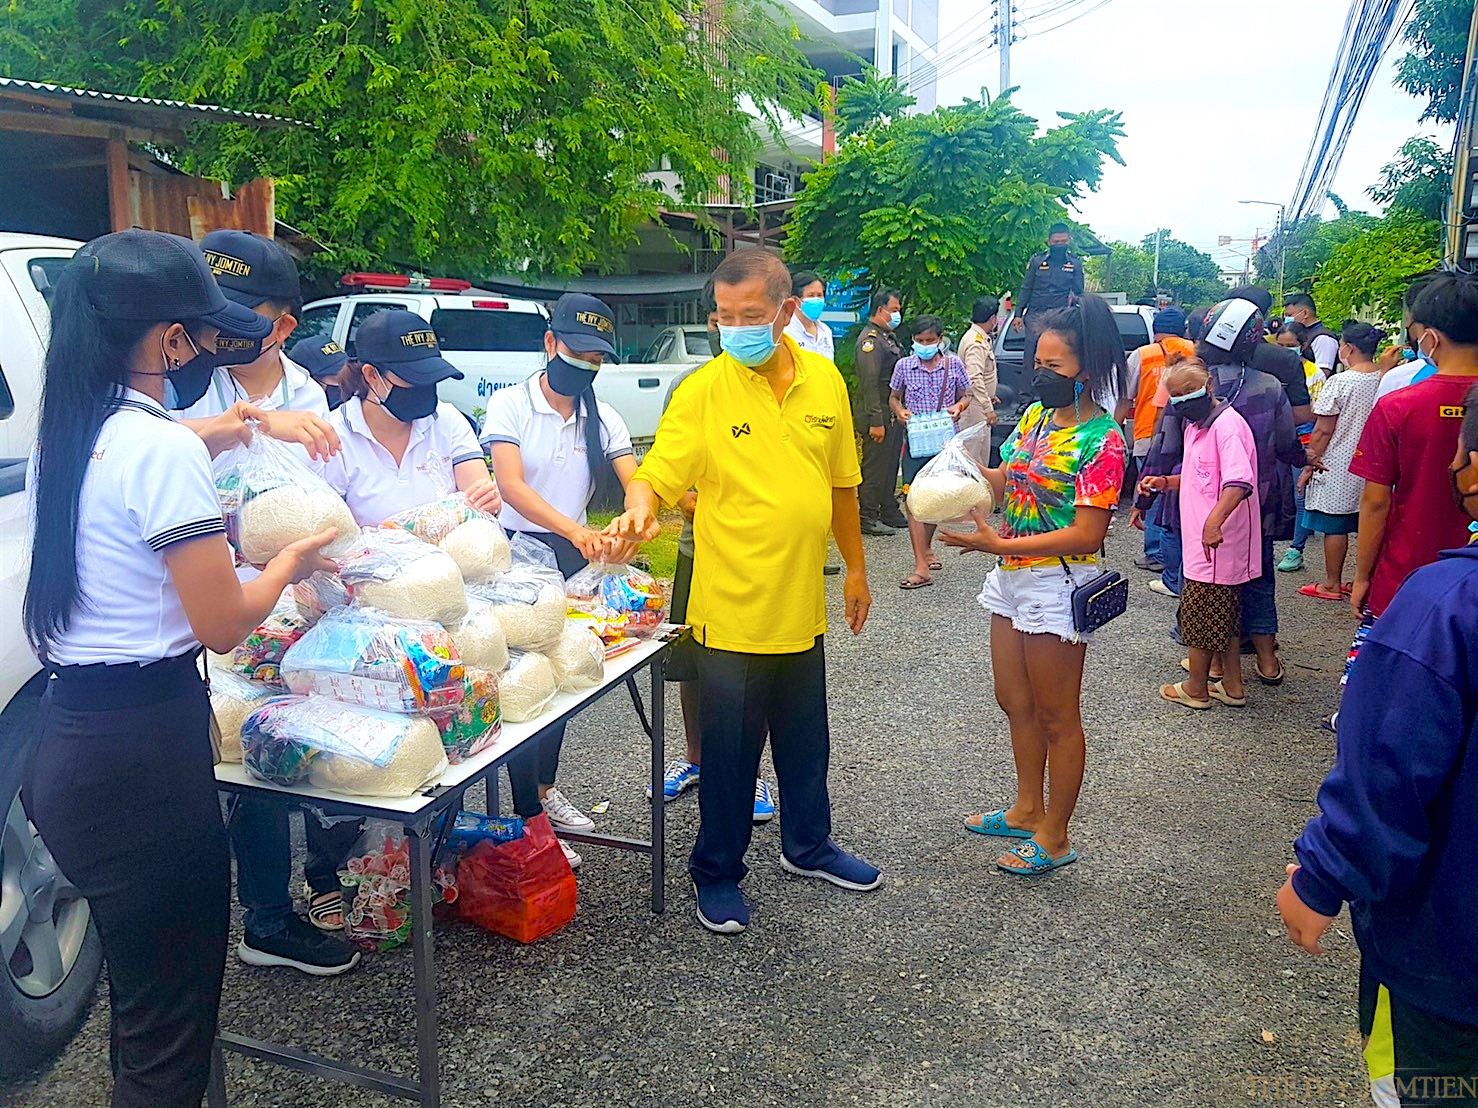 The Ivy Jomtien Beach donating survival bags to the communities Soi Khao Noi affected by COVID-19.